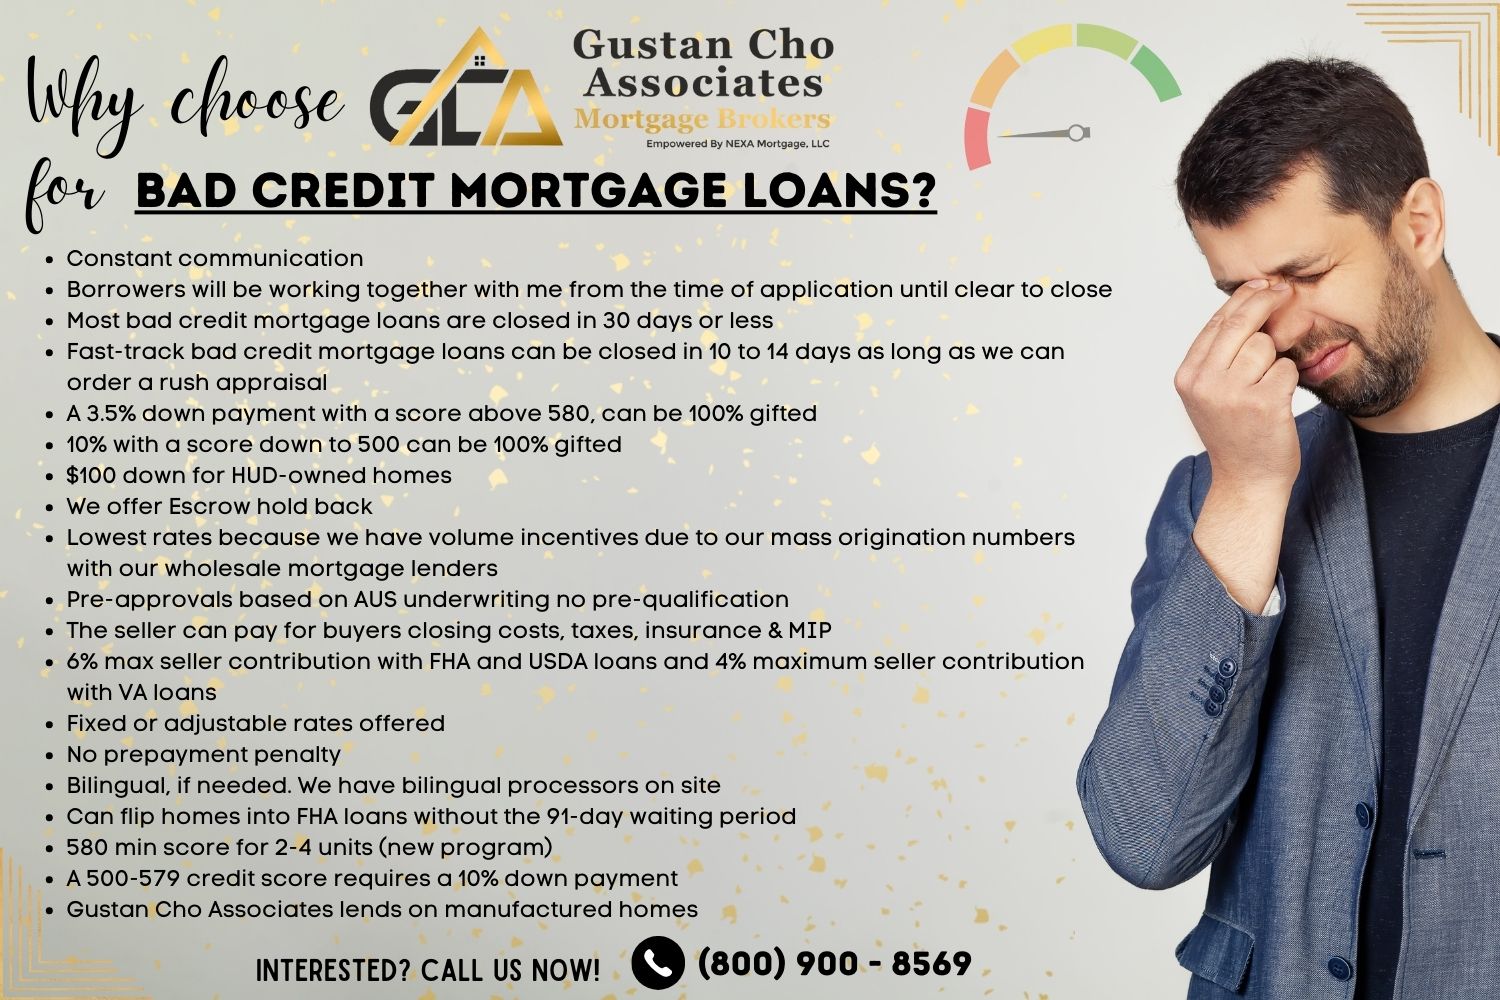 Bad Credit Mortgage Loans & Qualification Requirements